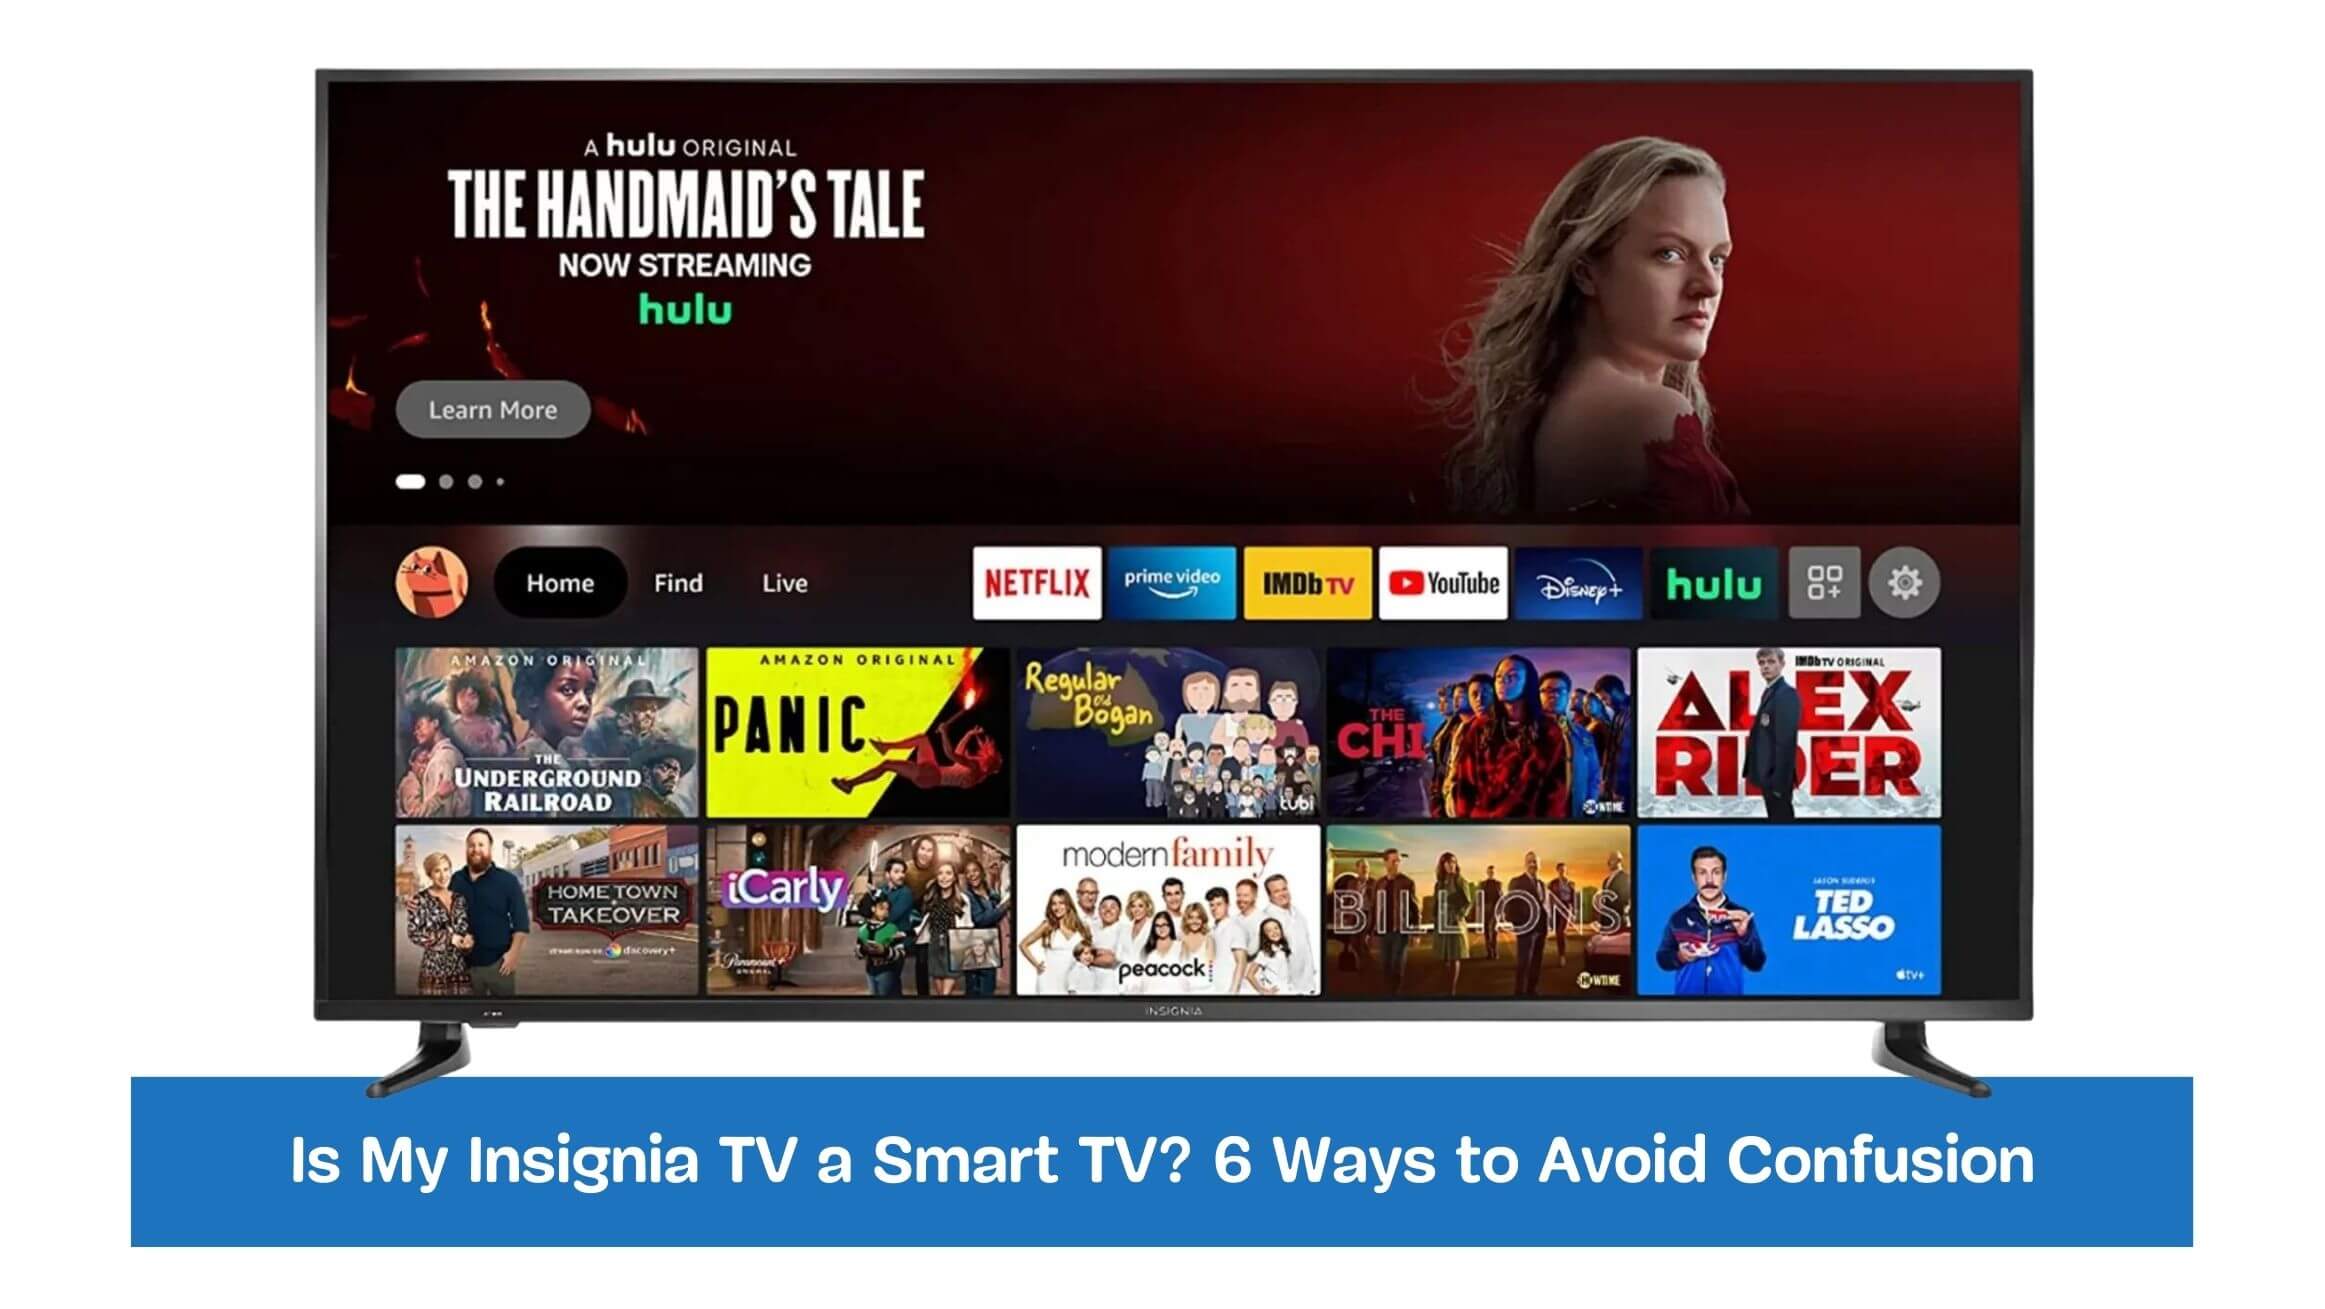 Is My Insignia TV a Smart TV? 6 Ways to Avoid Confusion